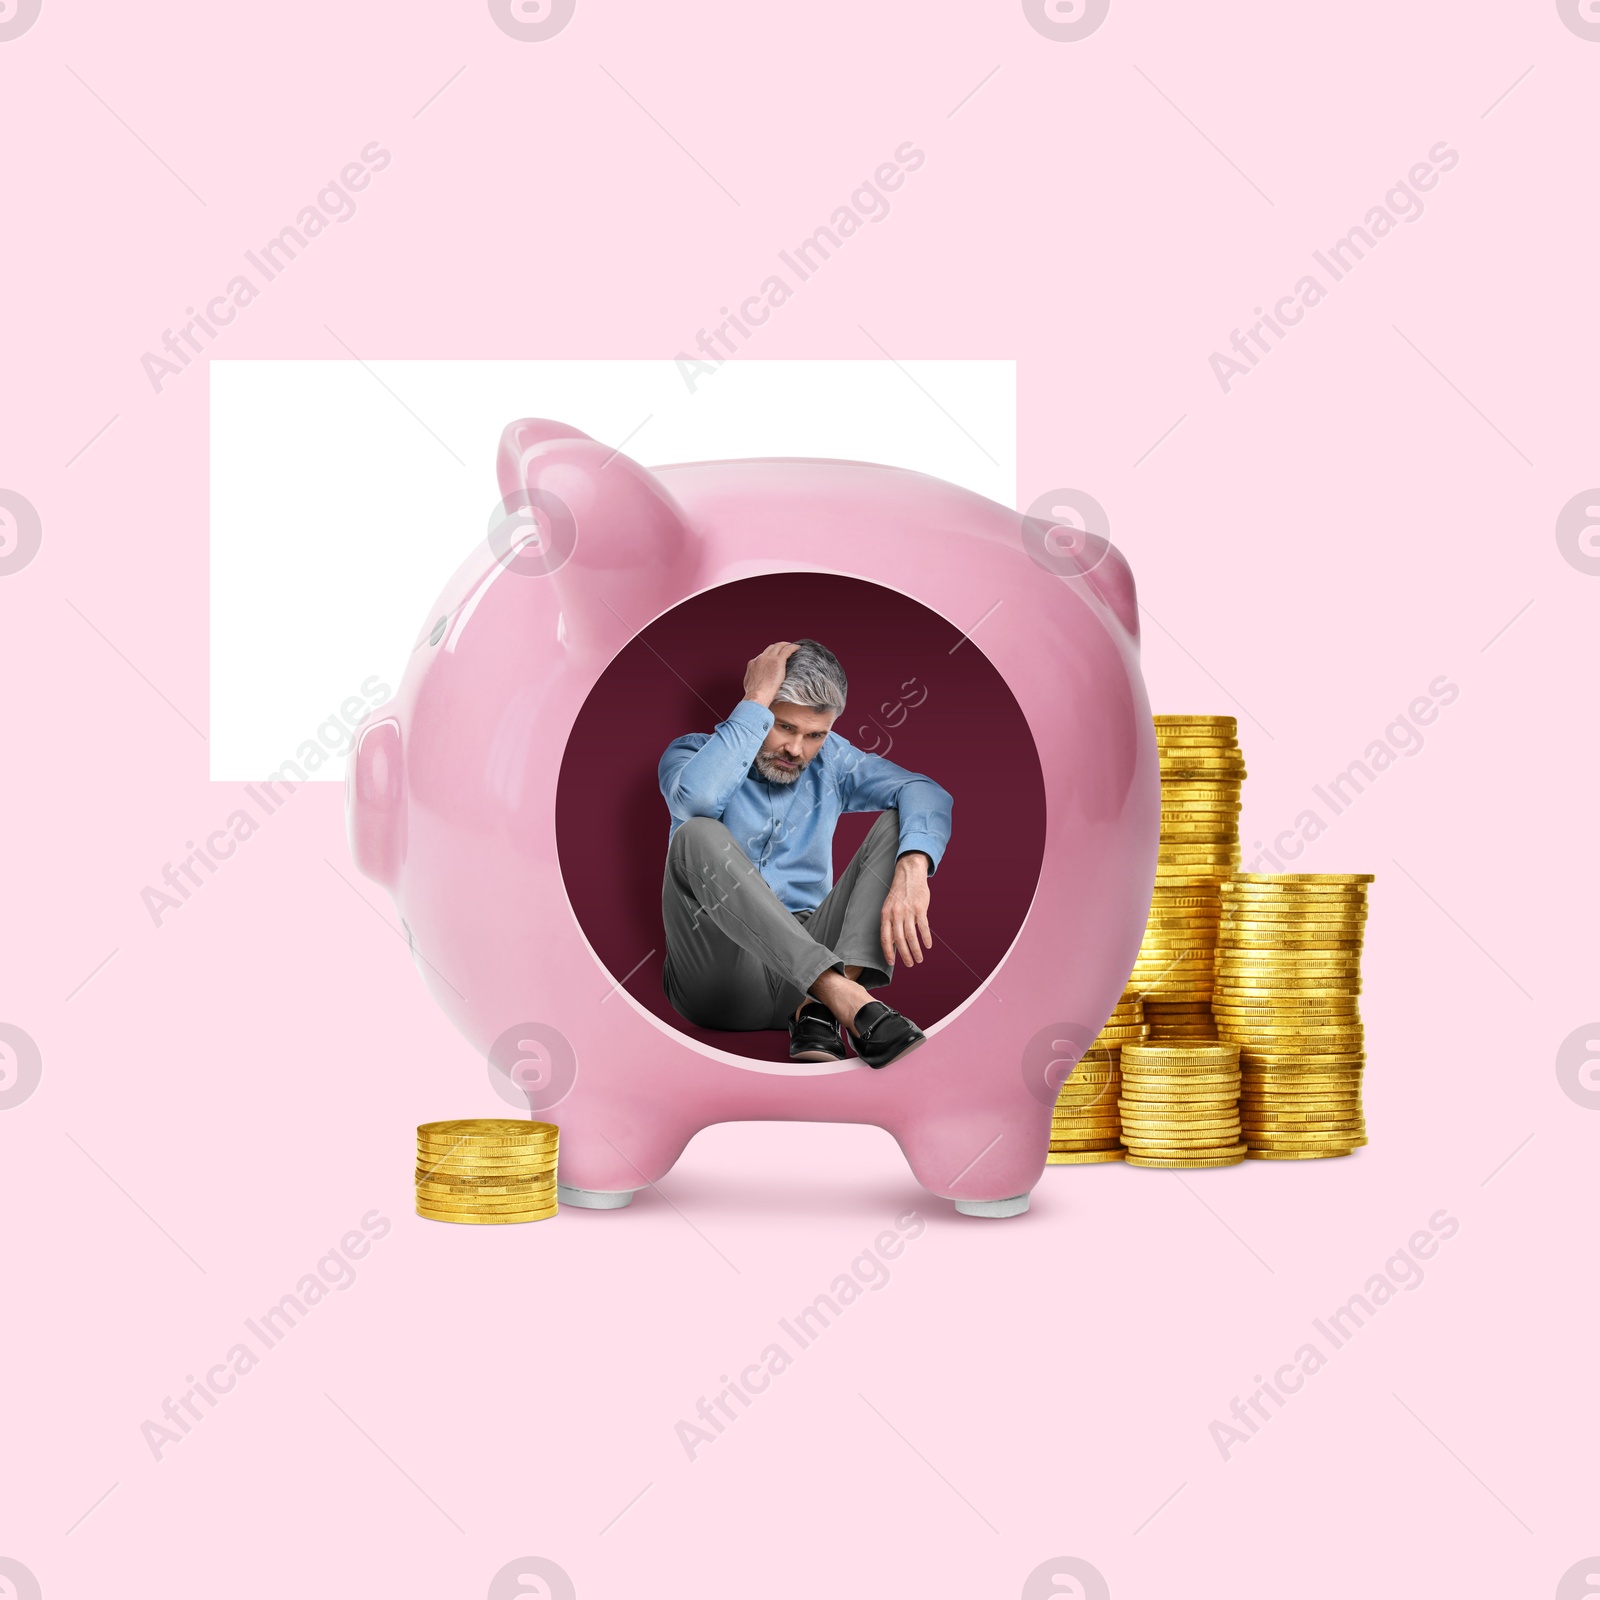 Image of Sad man sitting inside of piggy bank near stacked coins on pink background, creative collage